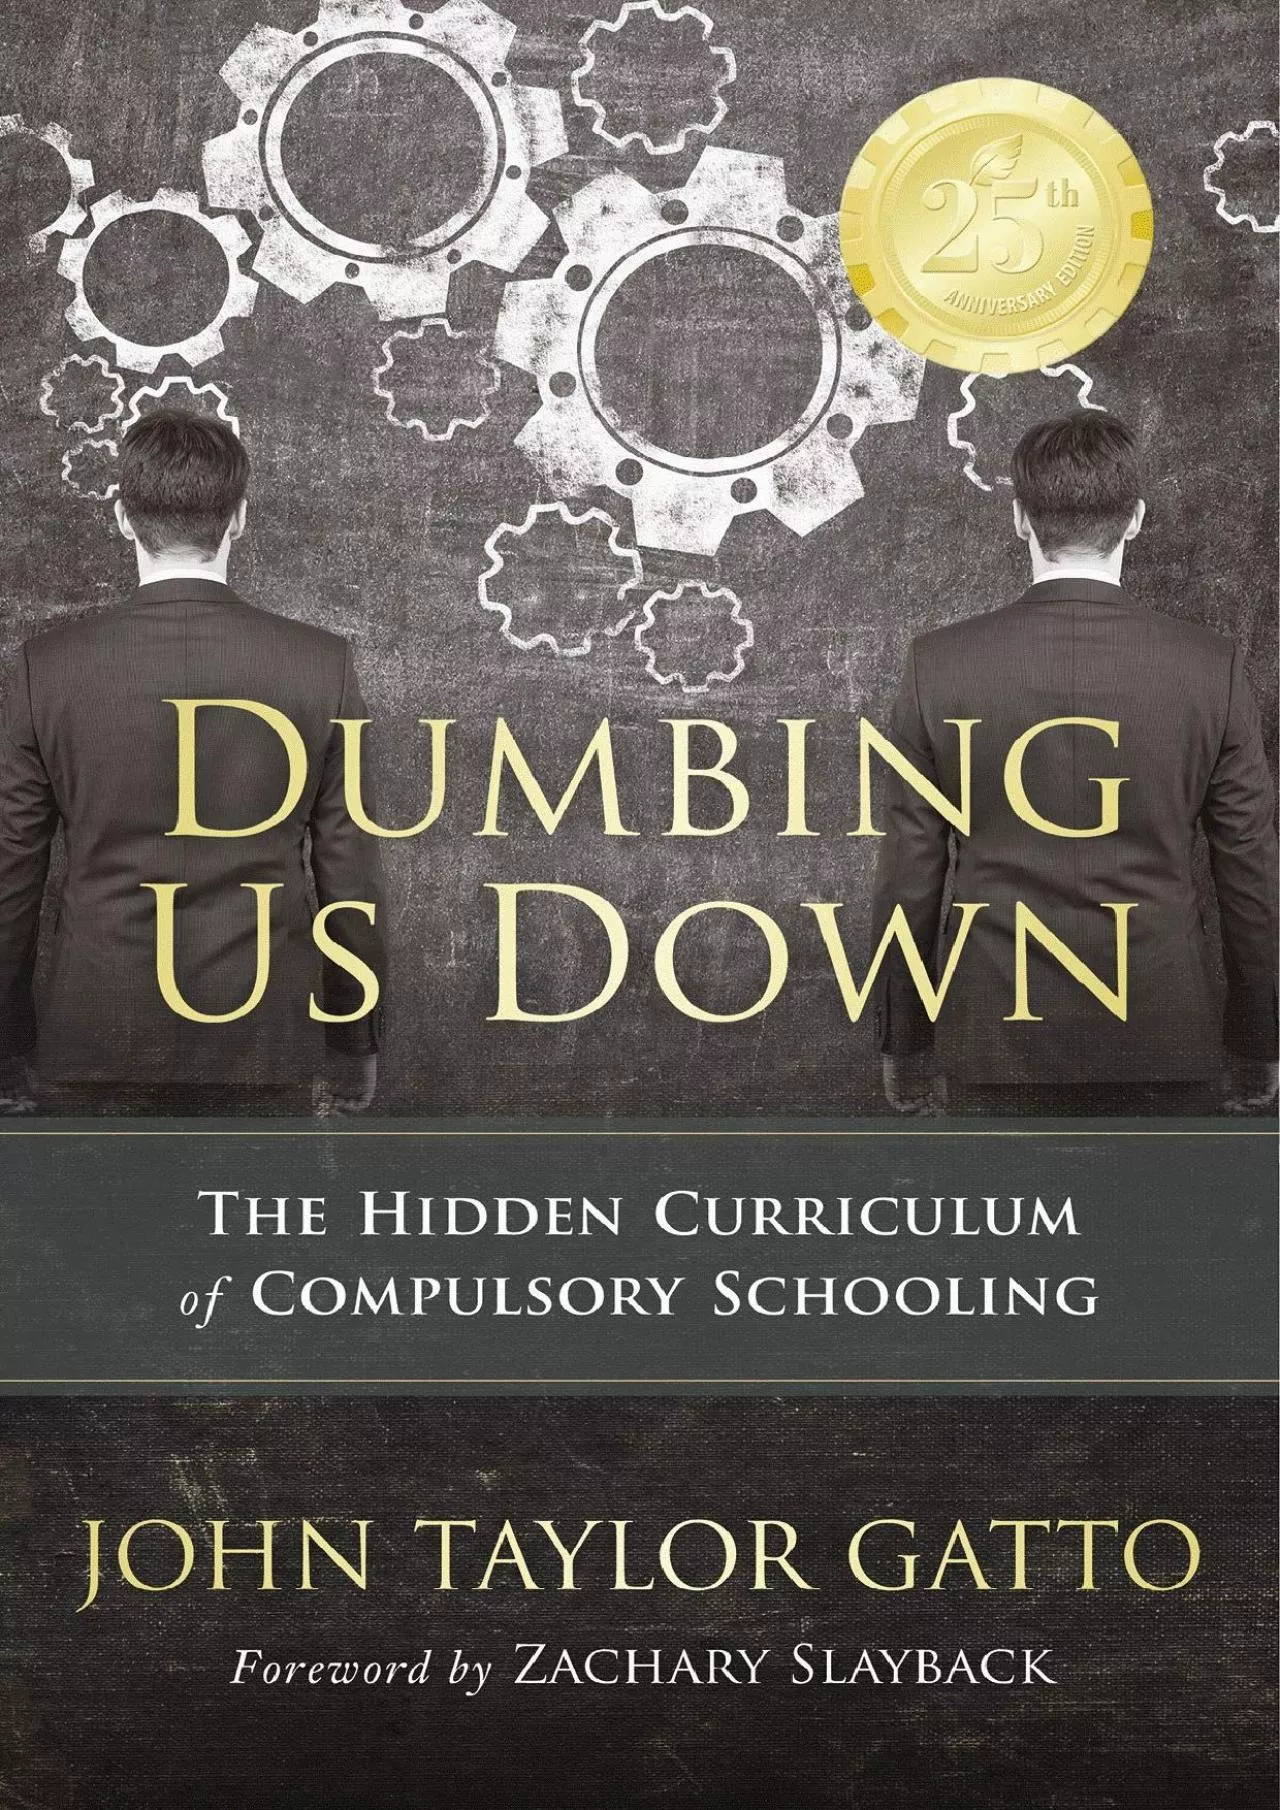 [READ] Dumbing Us Down - 25th Anniversary Edition: The Hidden Curriculum of Compulsory